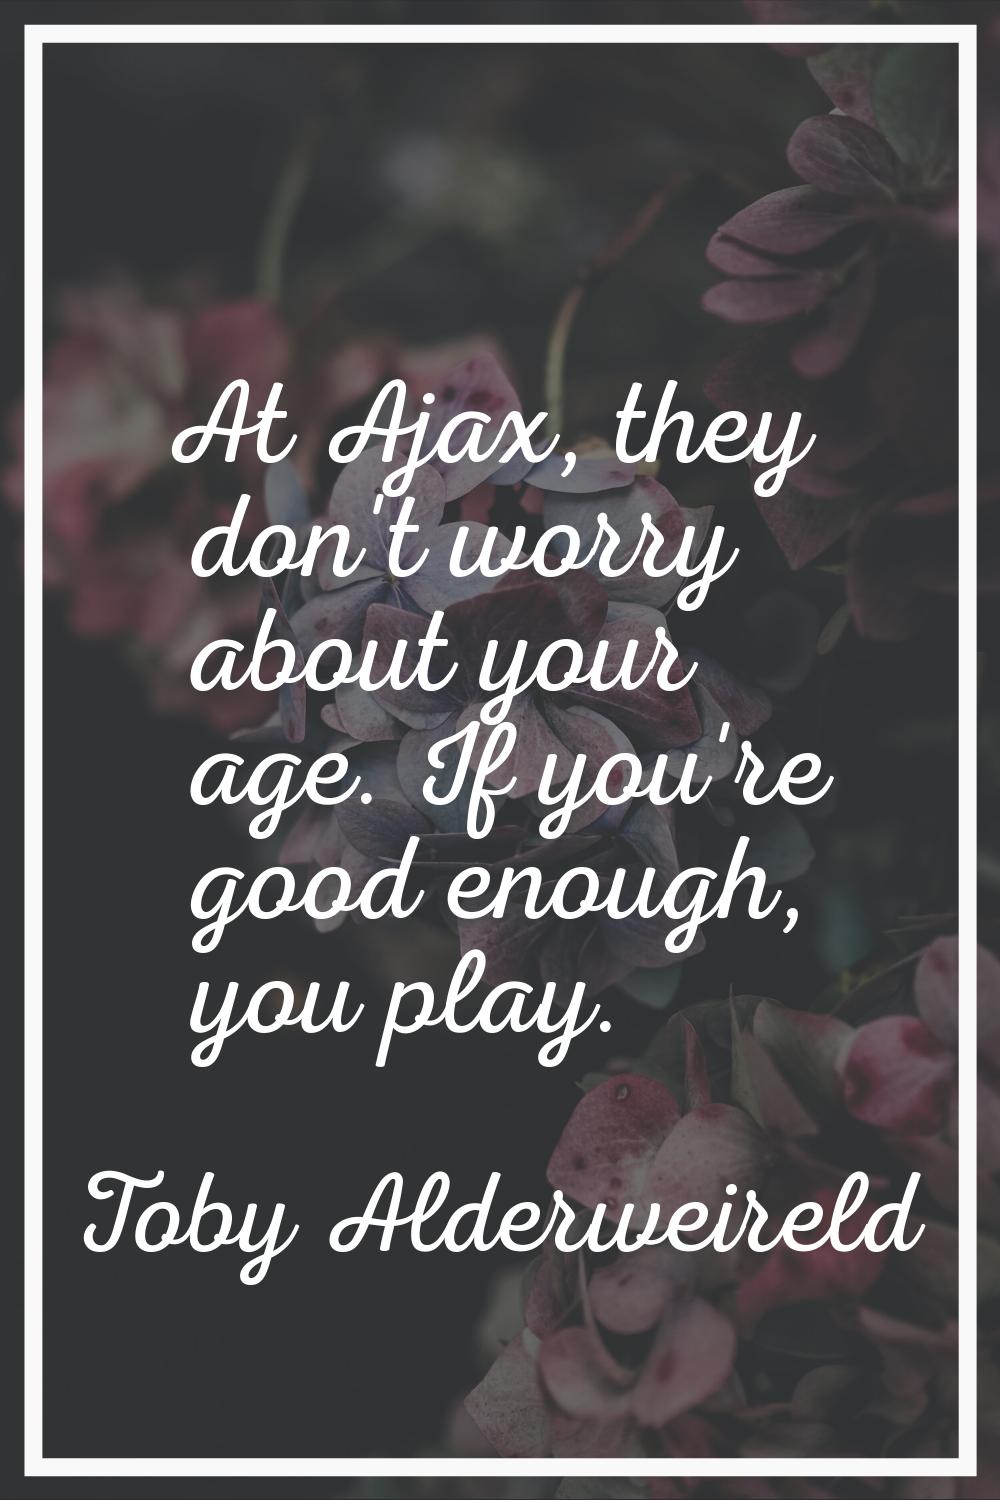 At Ajax, they don't worry about your age. If you're good enough, you play.